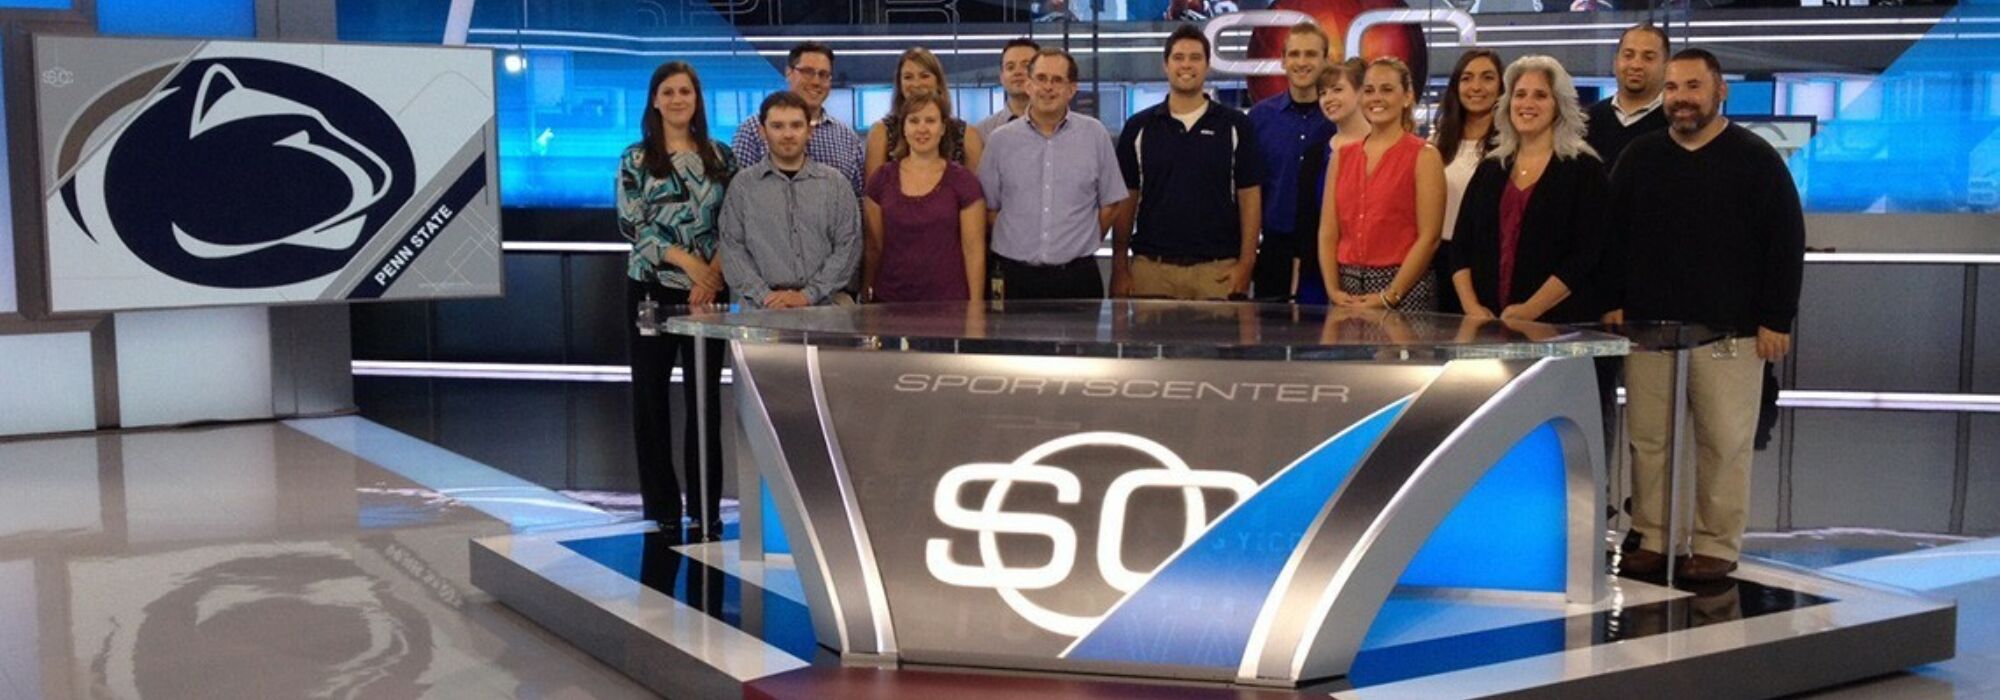 Fifteen members of the John Curley Center for Sports Journalism stand behind an anchor desk on the set of ESPN's SportsCenter